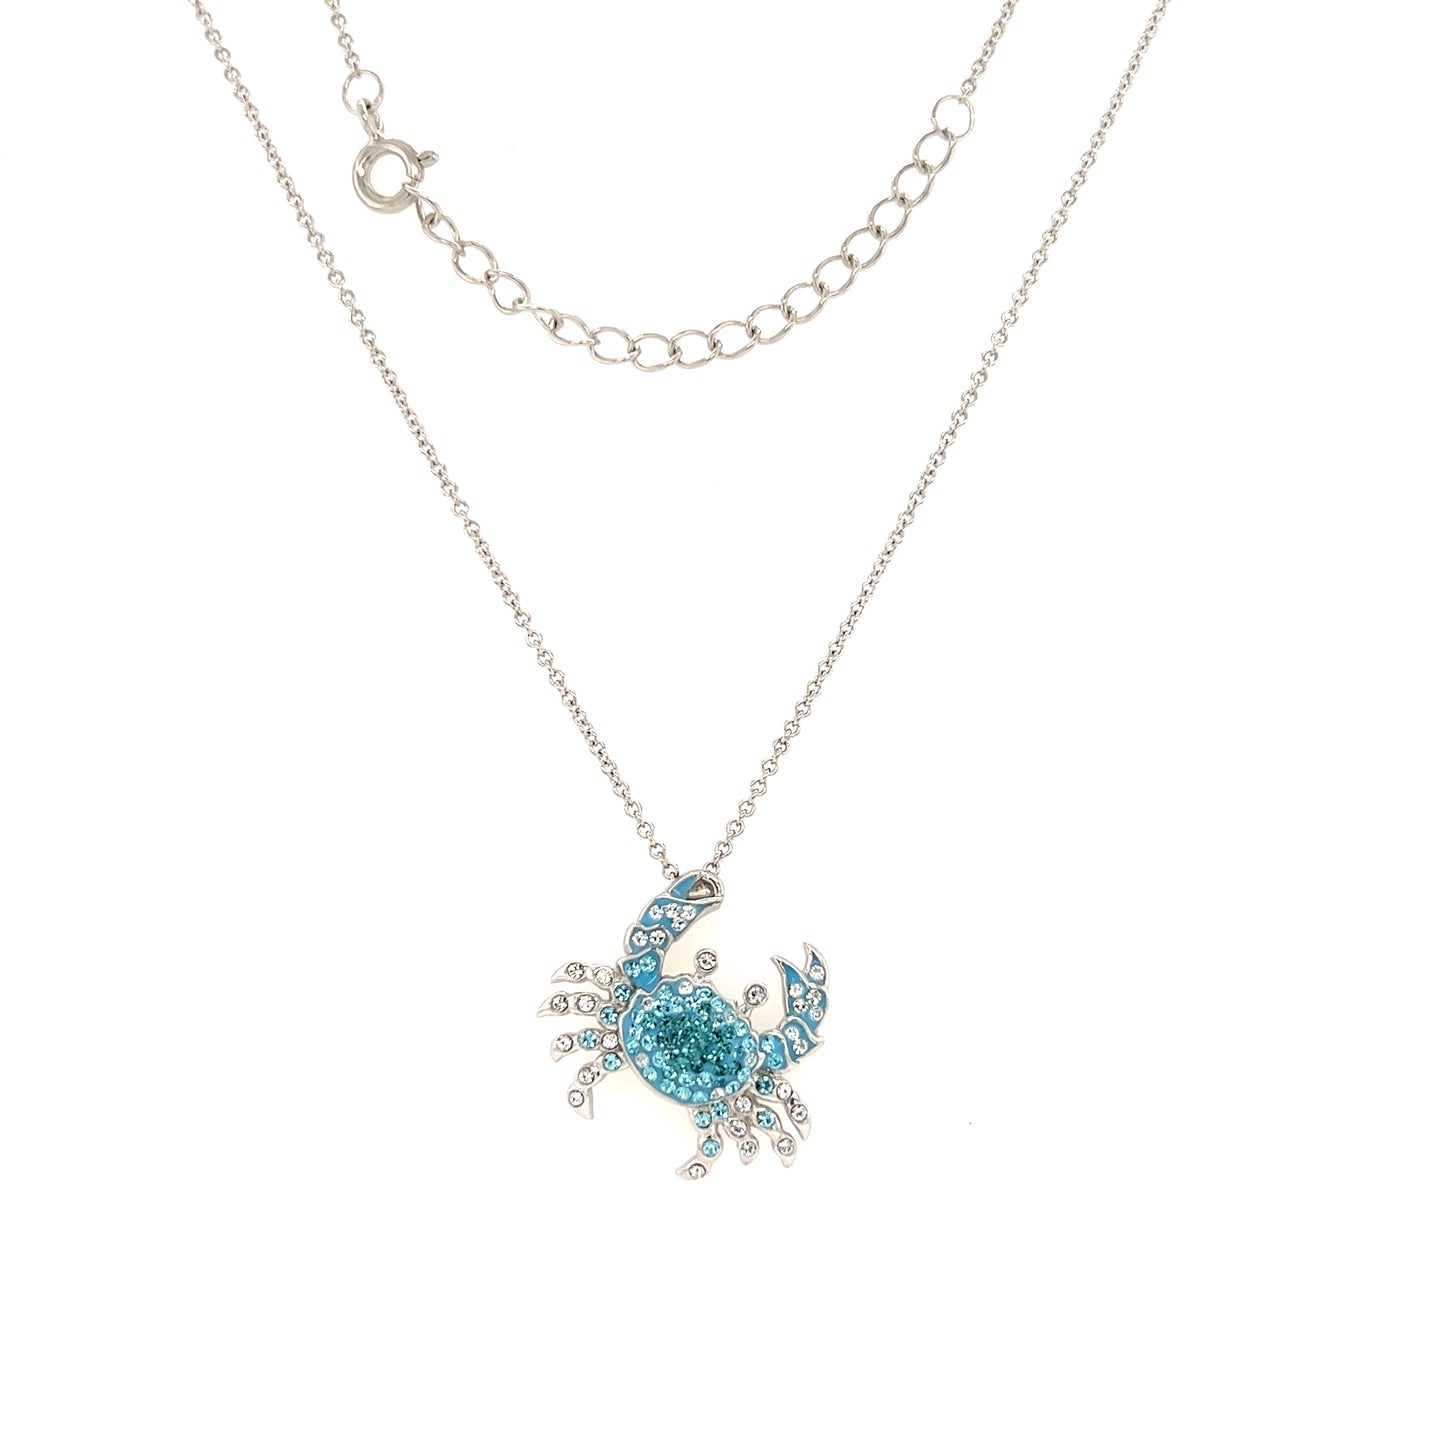 Blue Crab Necklace with Aqua and White Crystals in Sterling Silver Full Necklace View